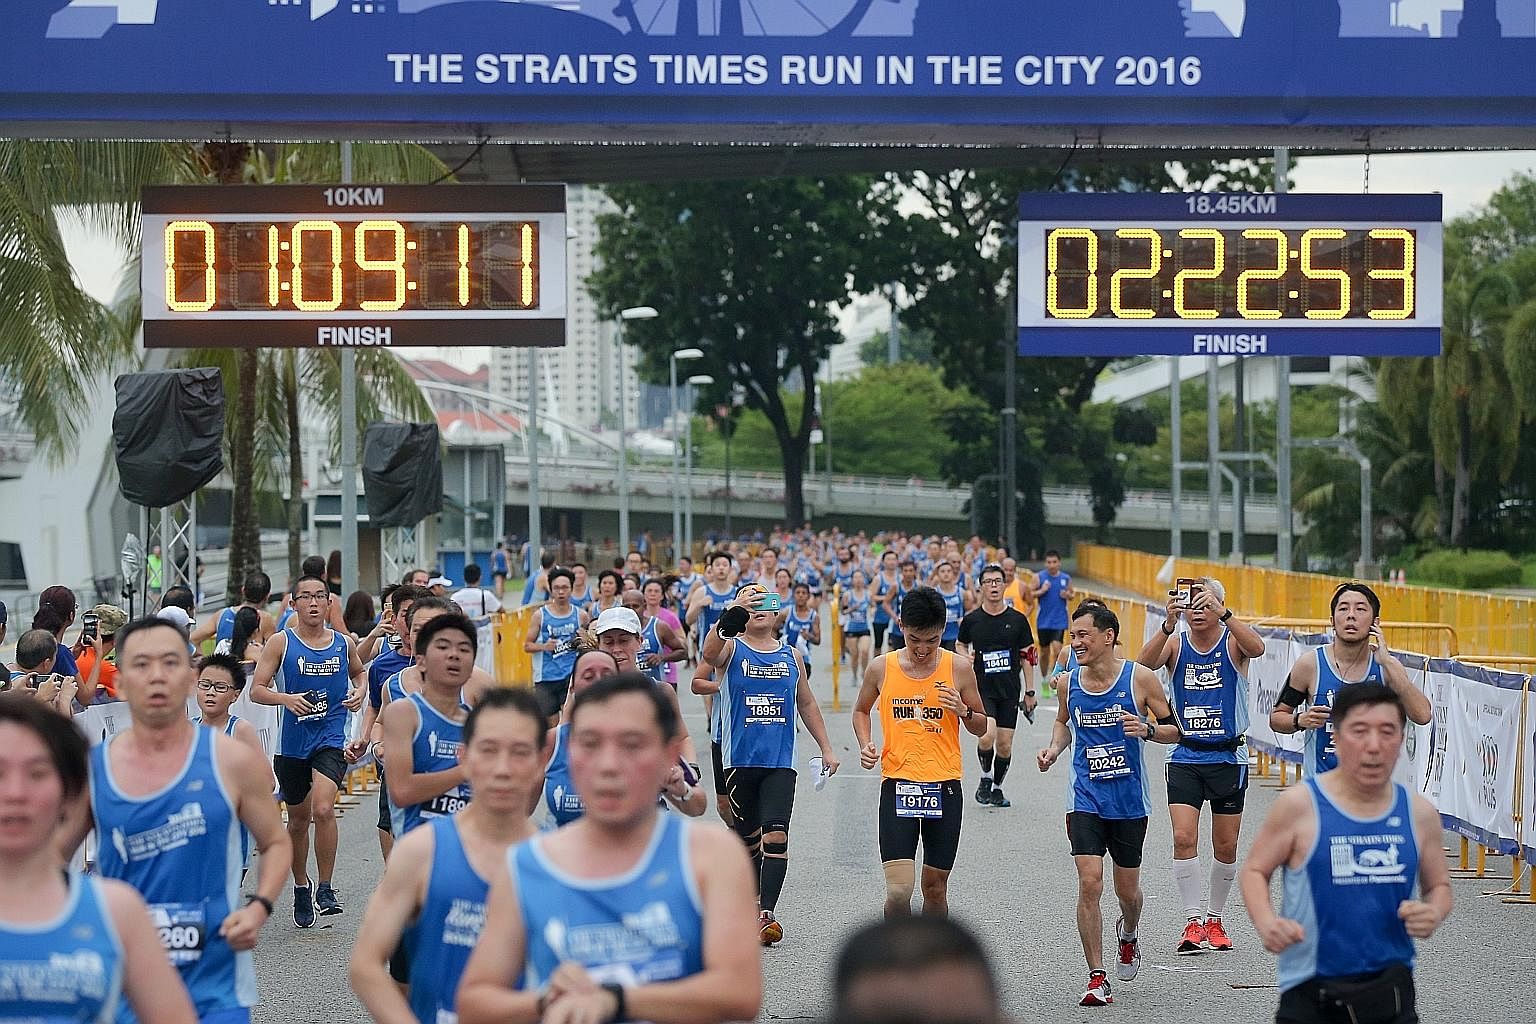 Participants at The Straits Times Run last year. Training for the run this year, to be held on July 16, gives one a clear goal to work towards, says the writer, as there is pressure to be ready. The closing date to sign up for the run has been extend